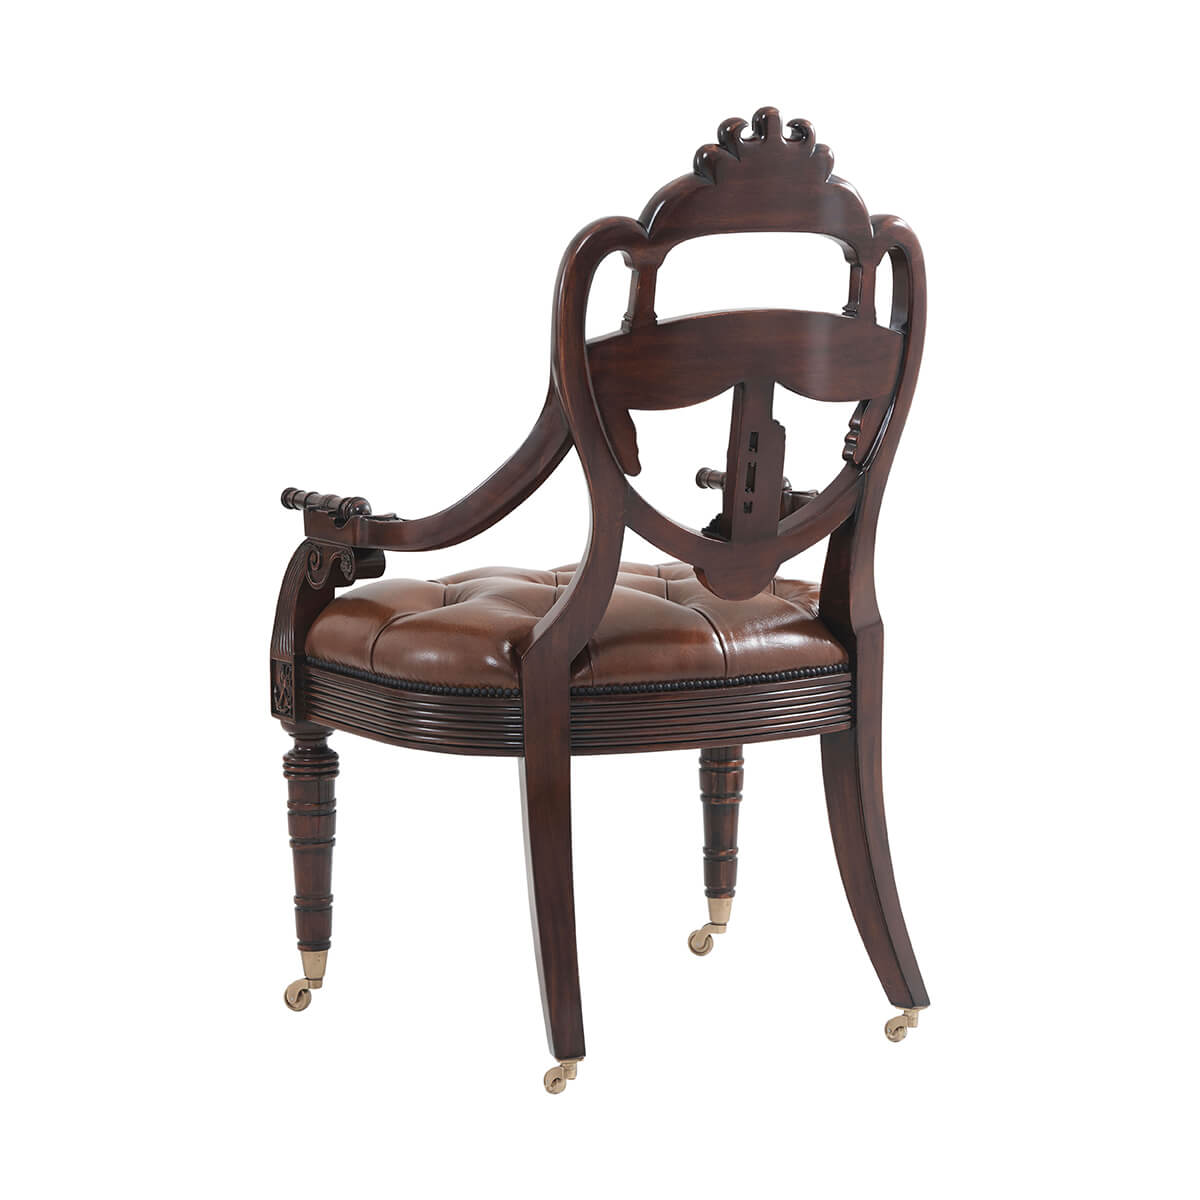 English Armchair - Carved Coat of Arms - English Georgian America